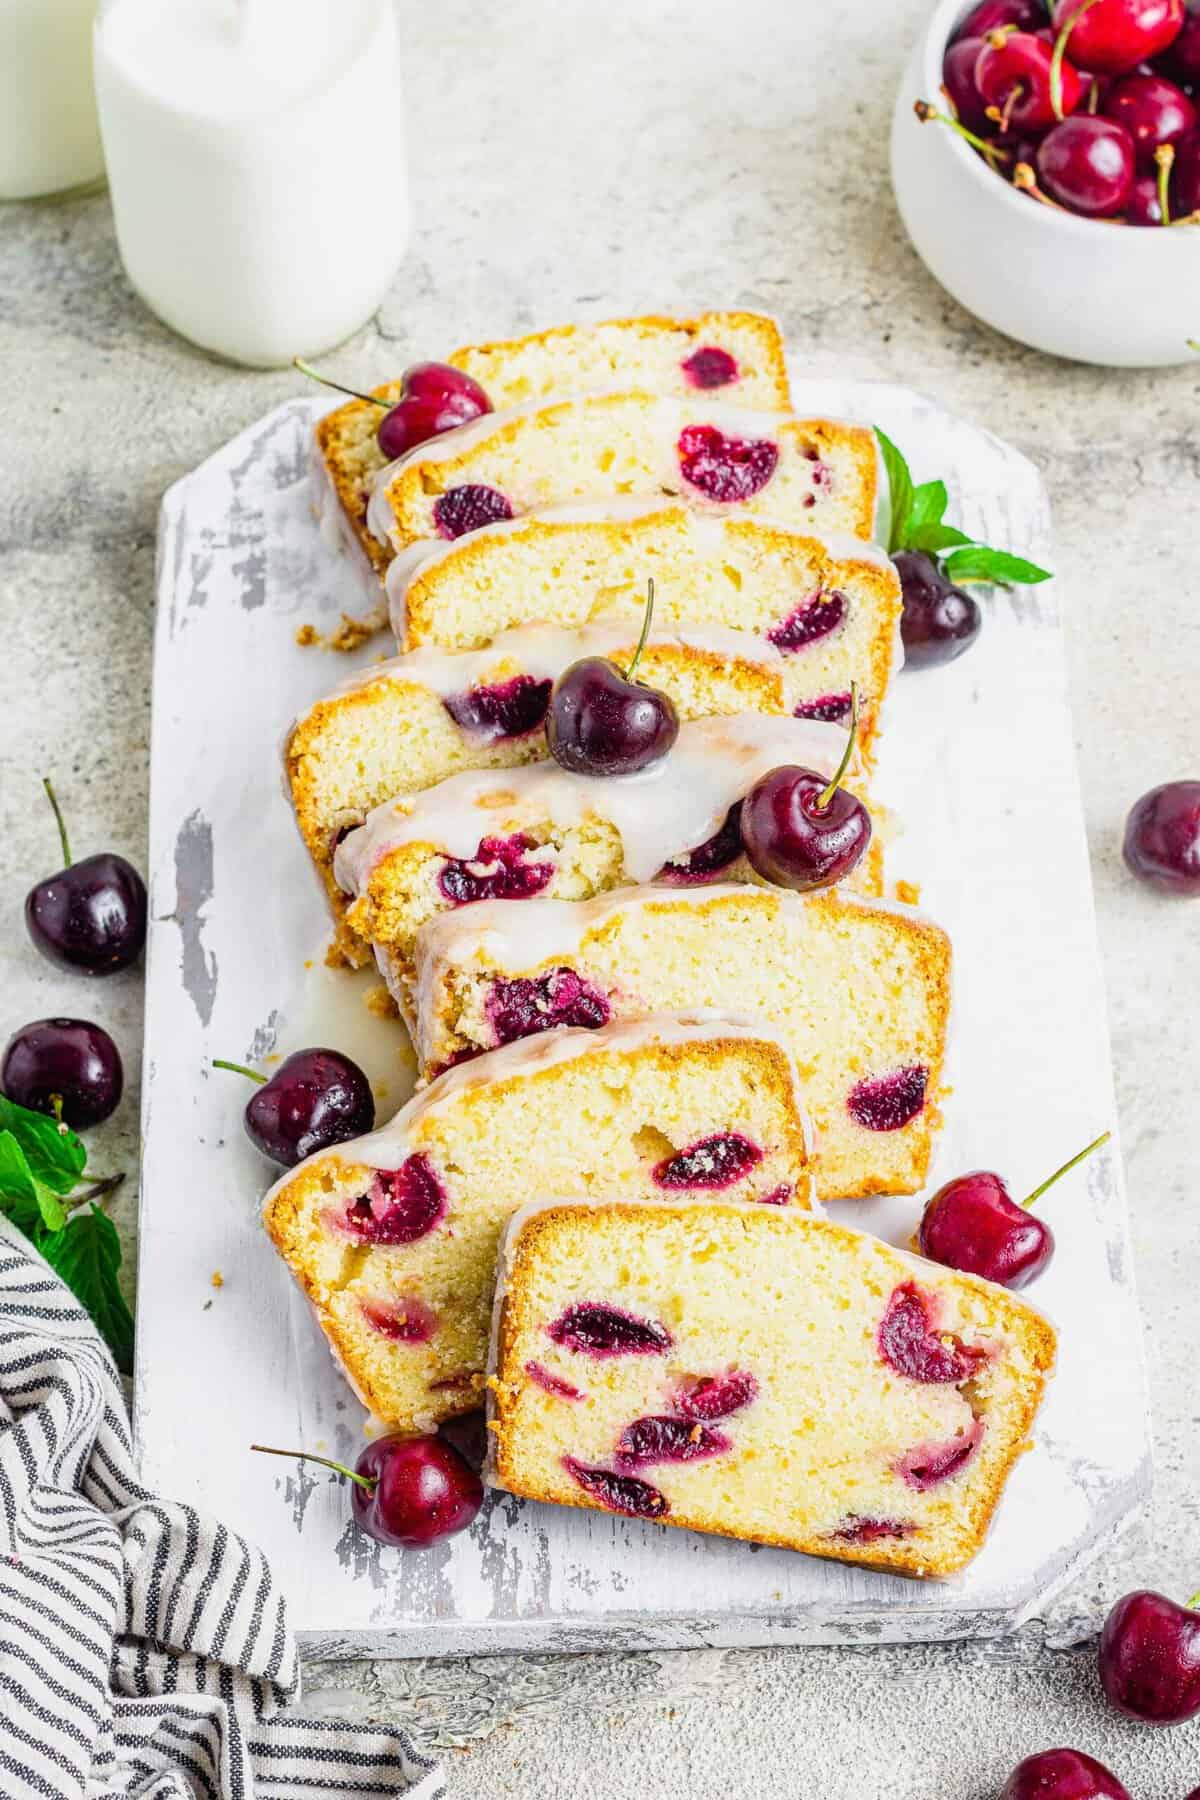 Sliced cherry amaretto loaf cake on rustic cutting board